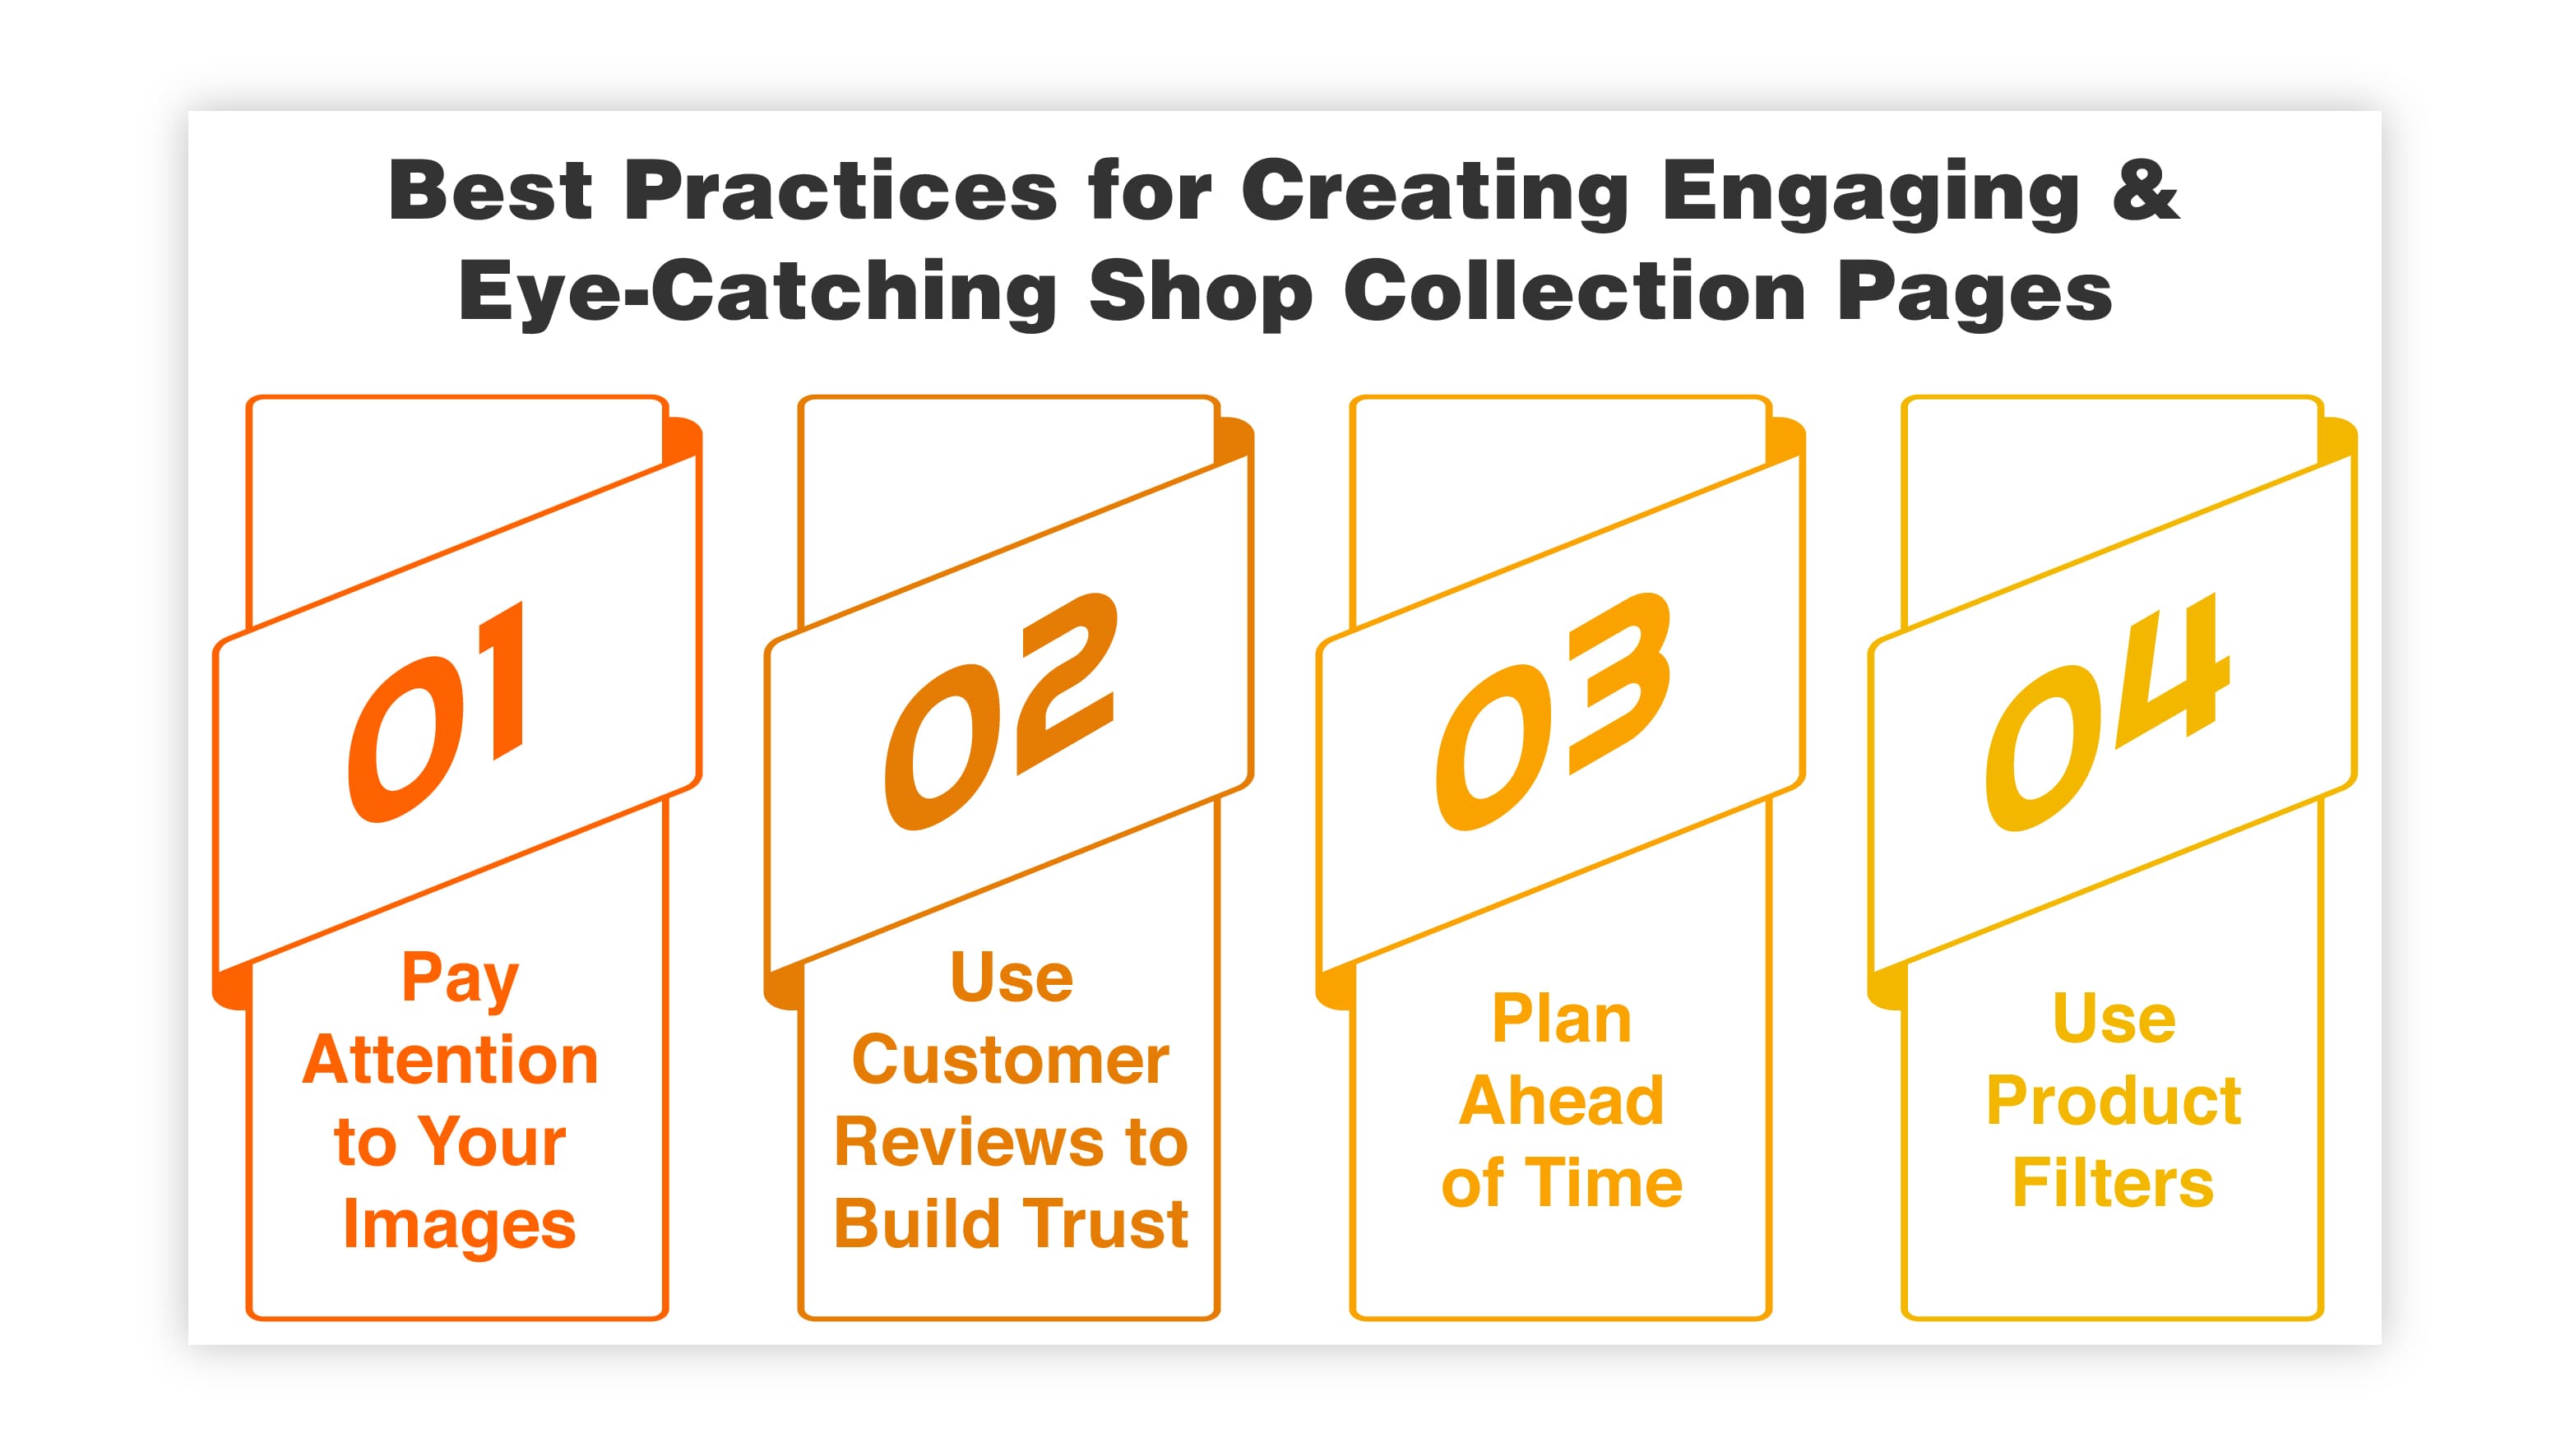 Best Practices for Creating Engaging Collection Pages